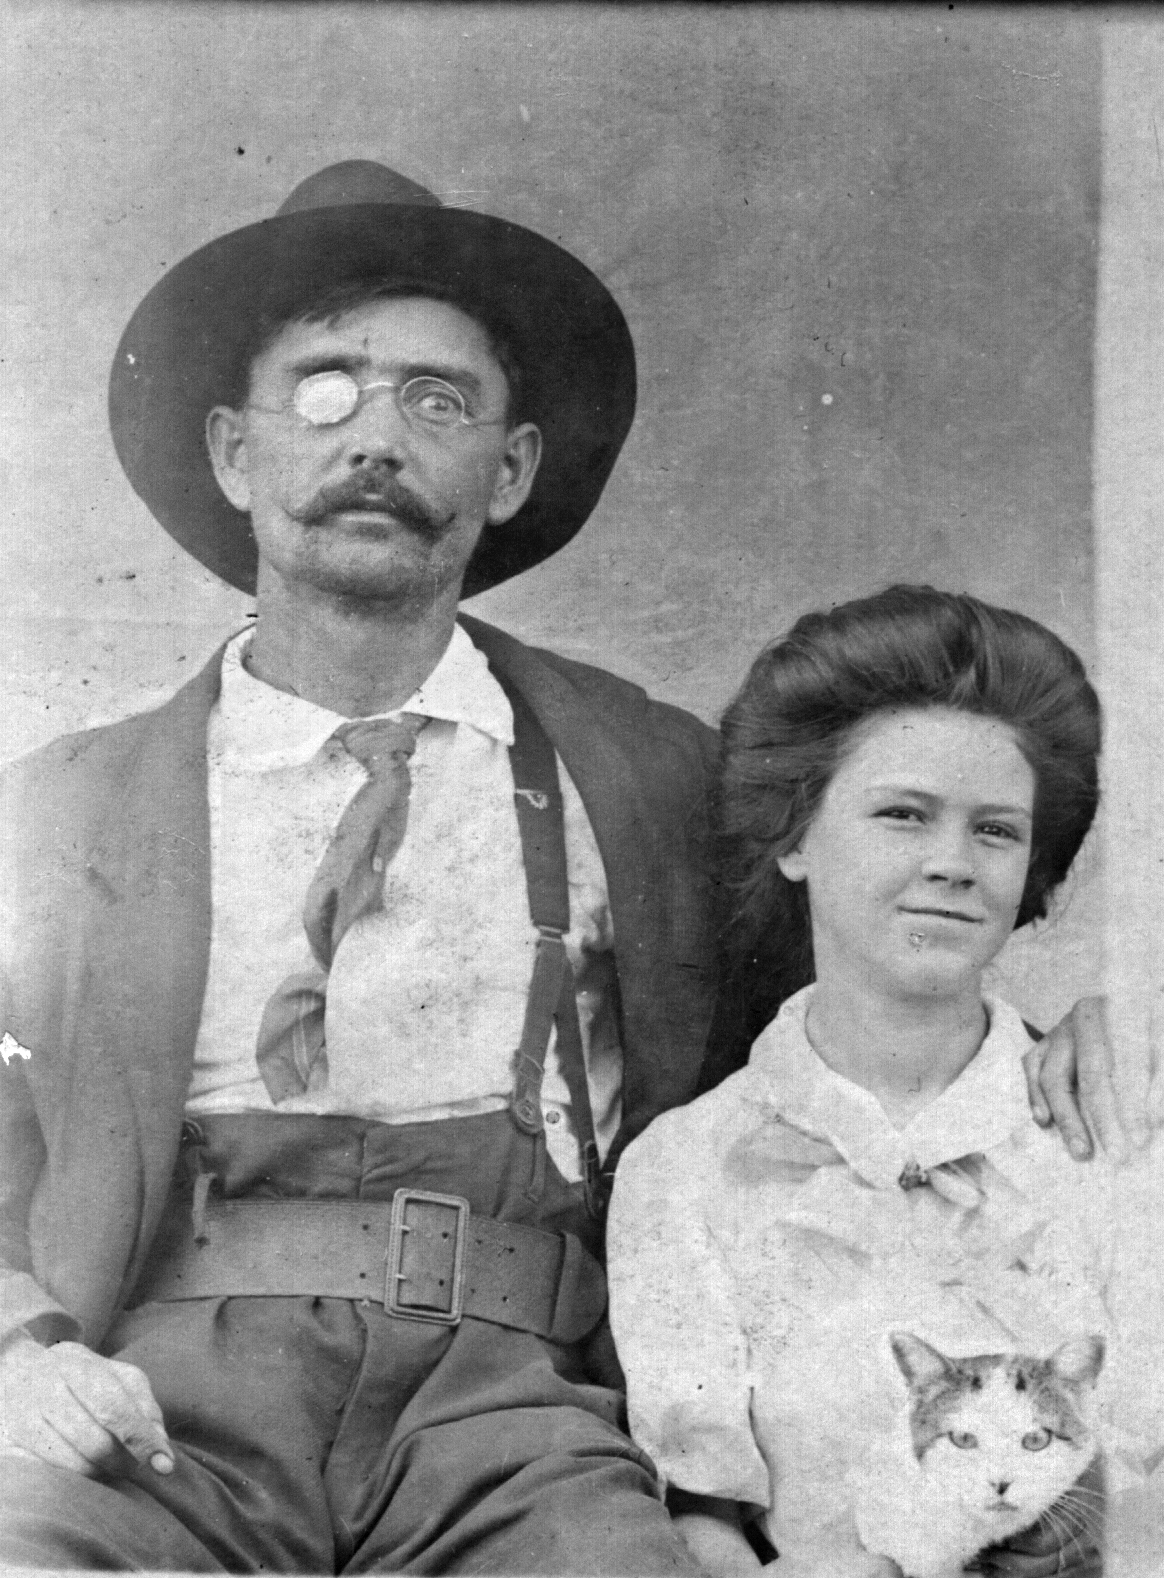 My grandfather Benjamin Franklin Taylor and his daughter Camilla and cat.  The photo was taken in Marked Tree, Arkansas in 1909.  Ben had lost his right eye in a hunting accident on the St. Francis River when he was younger.  In this photo he is wearing a gun belt and is carrying a Navy Colt.  Marked Tree was a dangerous logging town and men wore guns for protection.  A year after this photo was taken Camilla, my grandmother, would at the age of 15 marry Wm Robinson, age 31. View full size.